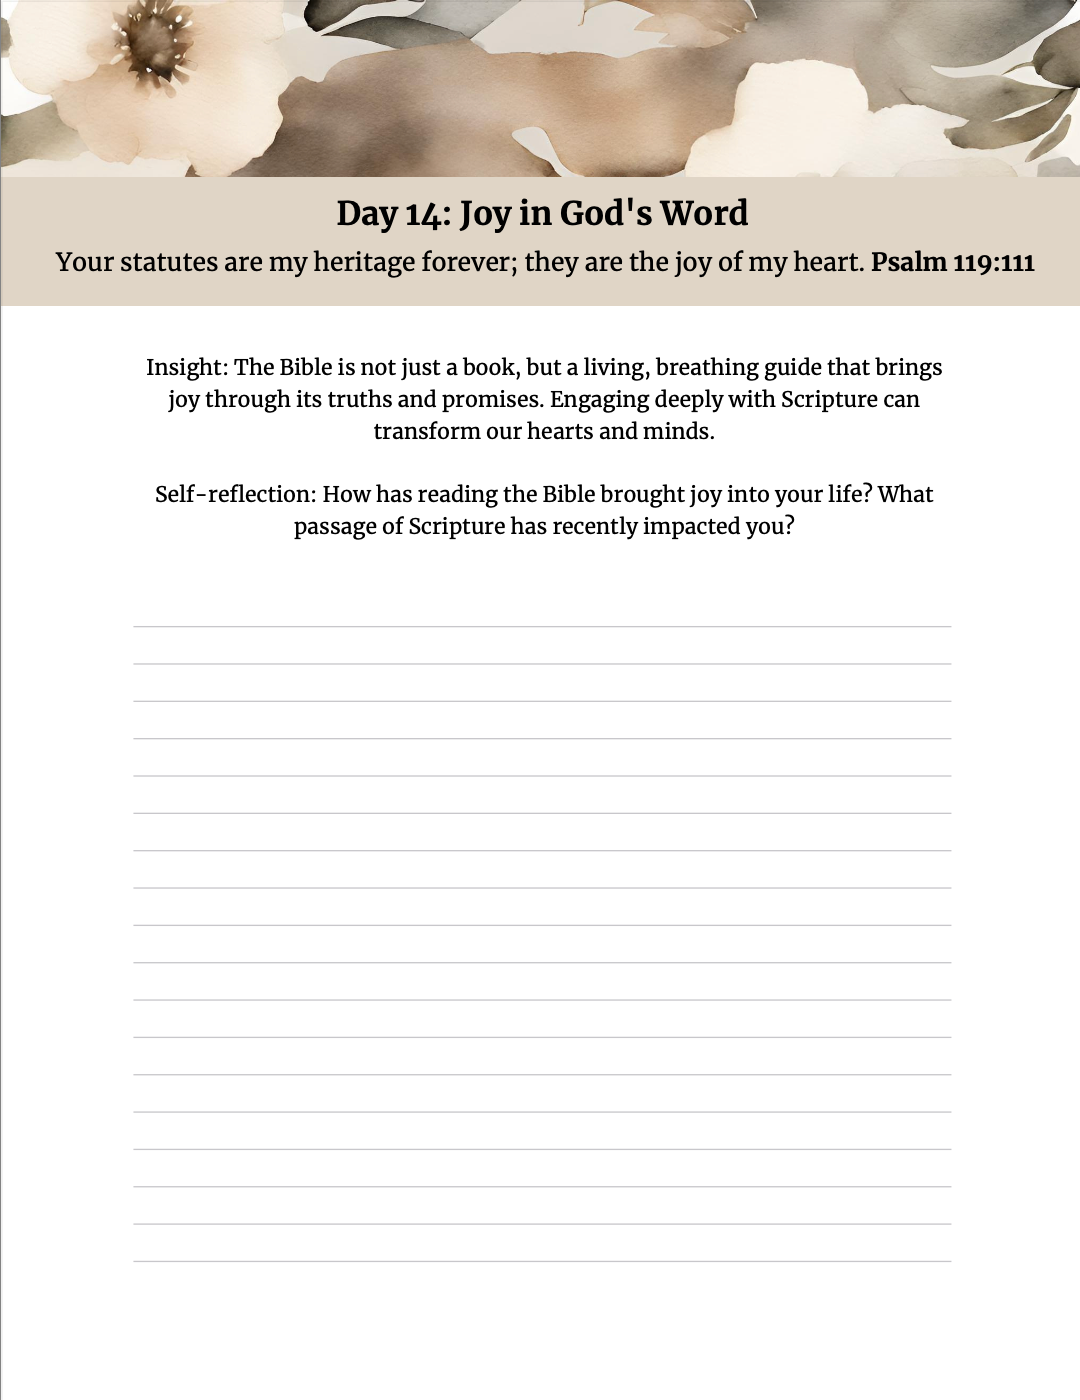 Finding Joy in the Journey: A 21-Day Devotional Journal